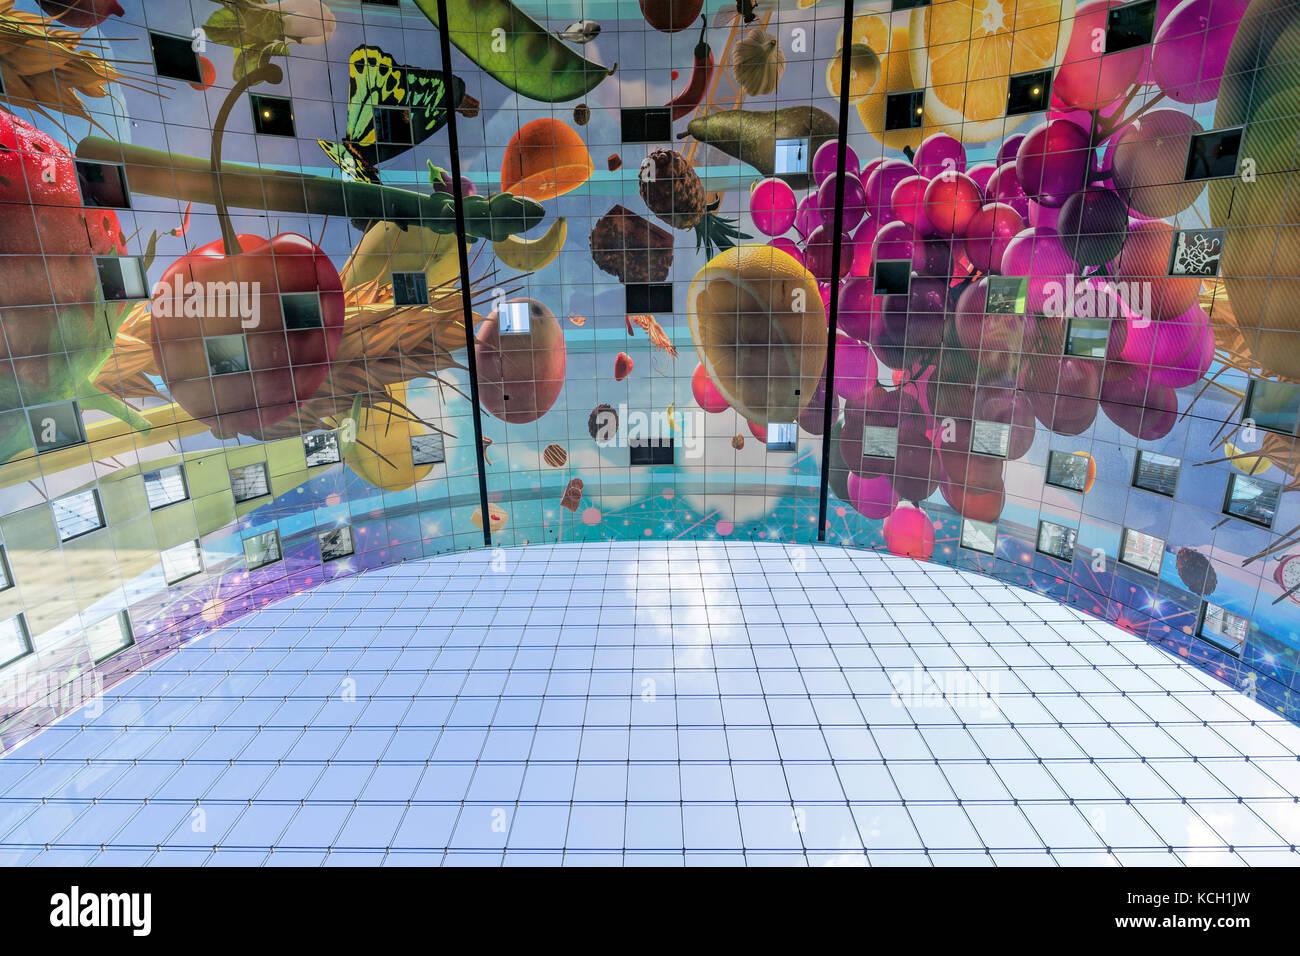 Artwork by Arno Coenen at the roof of the Markthal (Market Hall) in Rotterdam, Netherlands Stock Photo